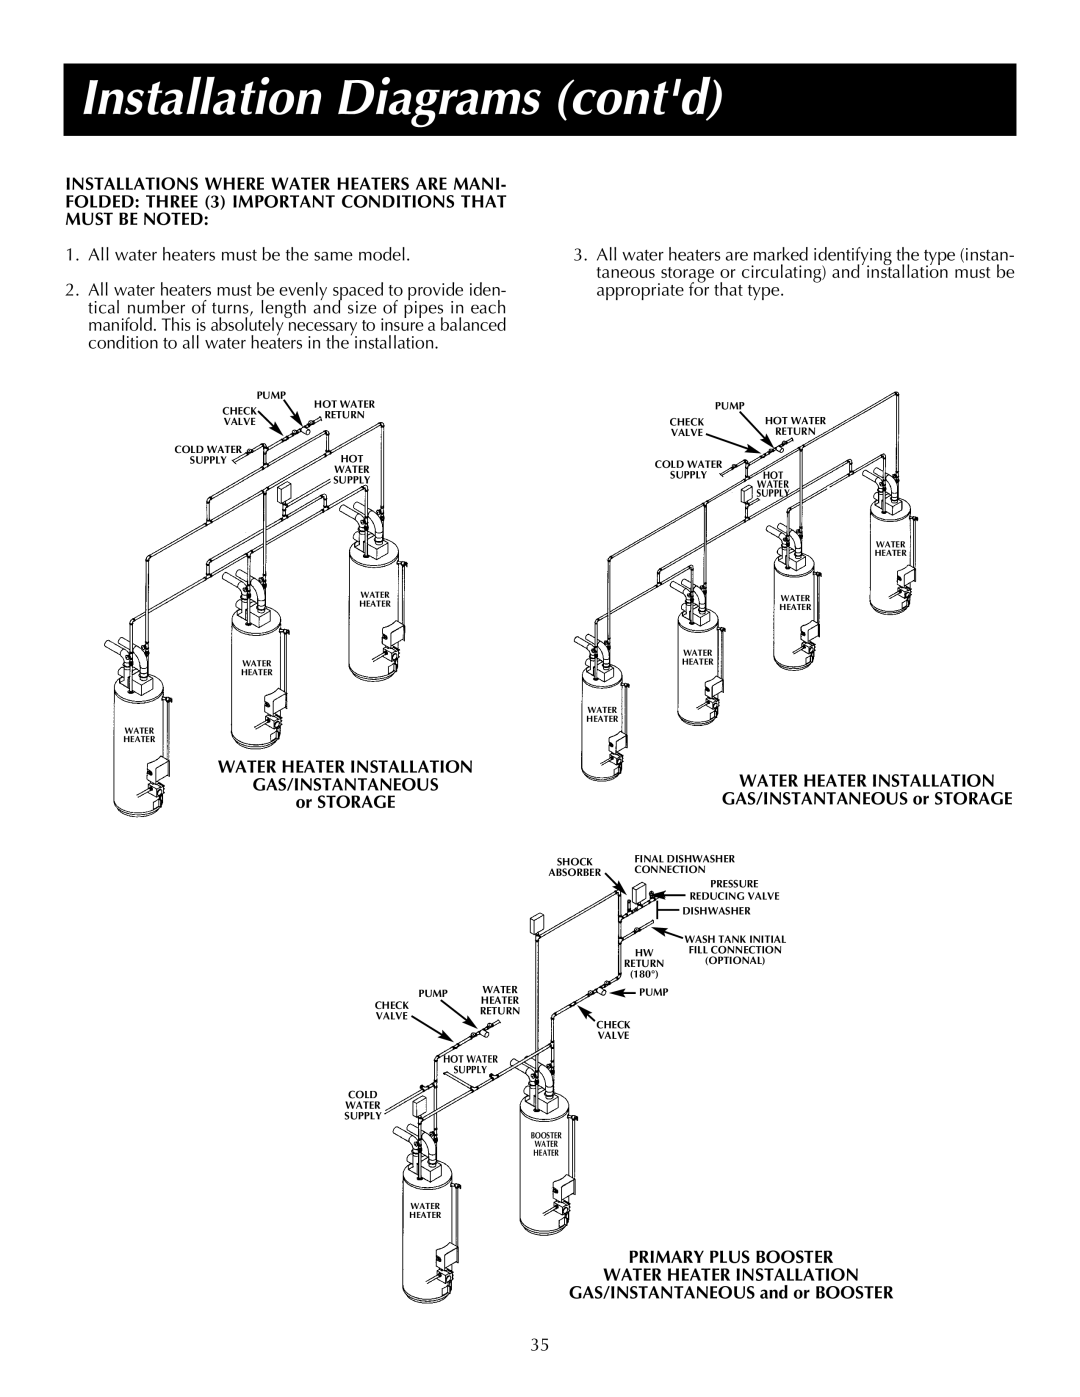 State Industries Commercial Gas Water Heater Installation Diagrams contd, Water Heater Installation GAS/INSTANTANEOUS 